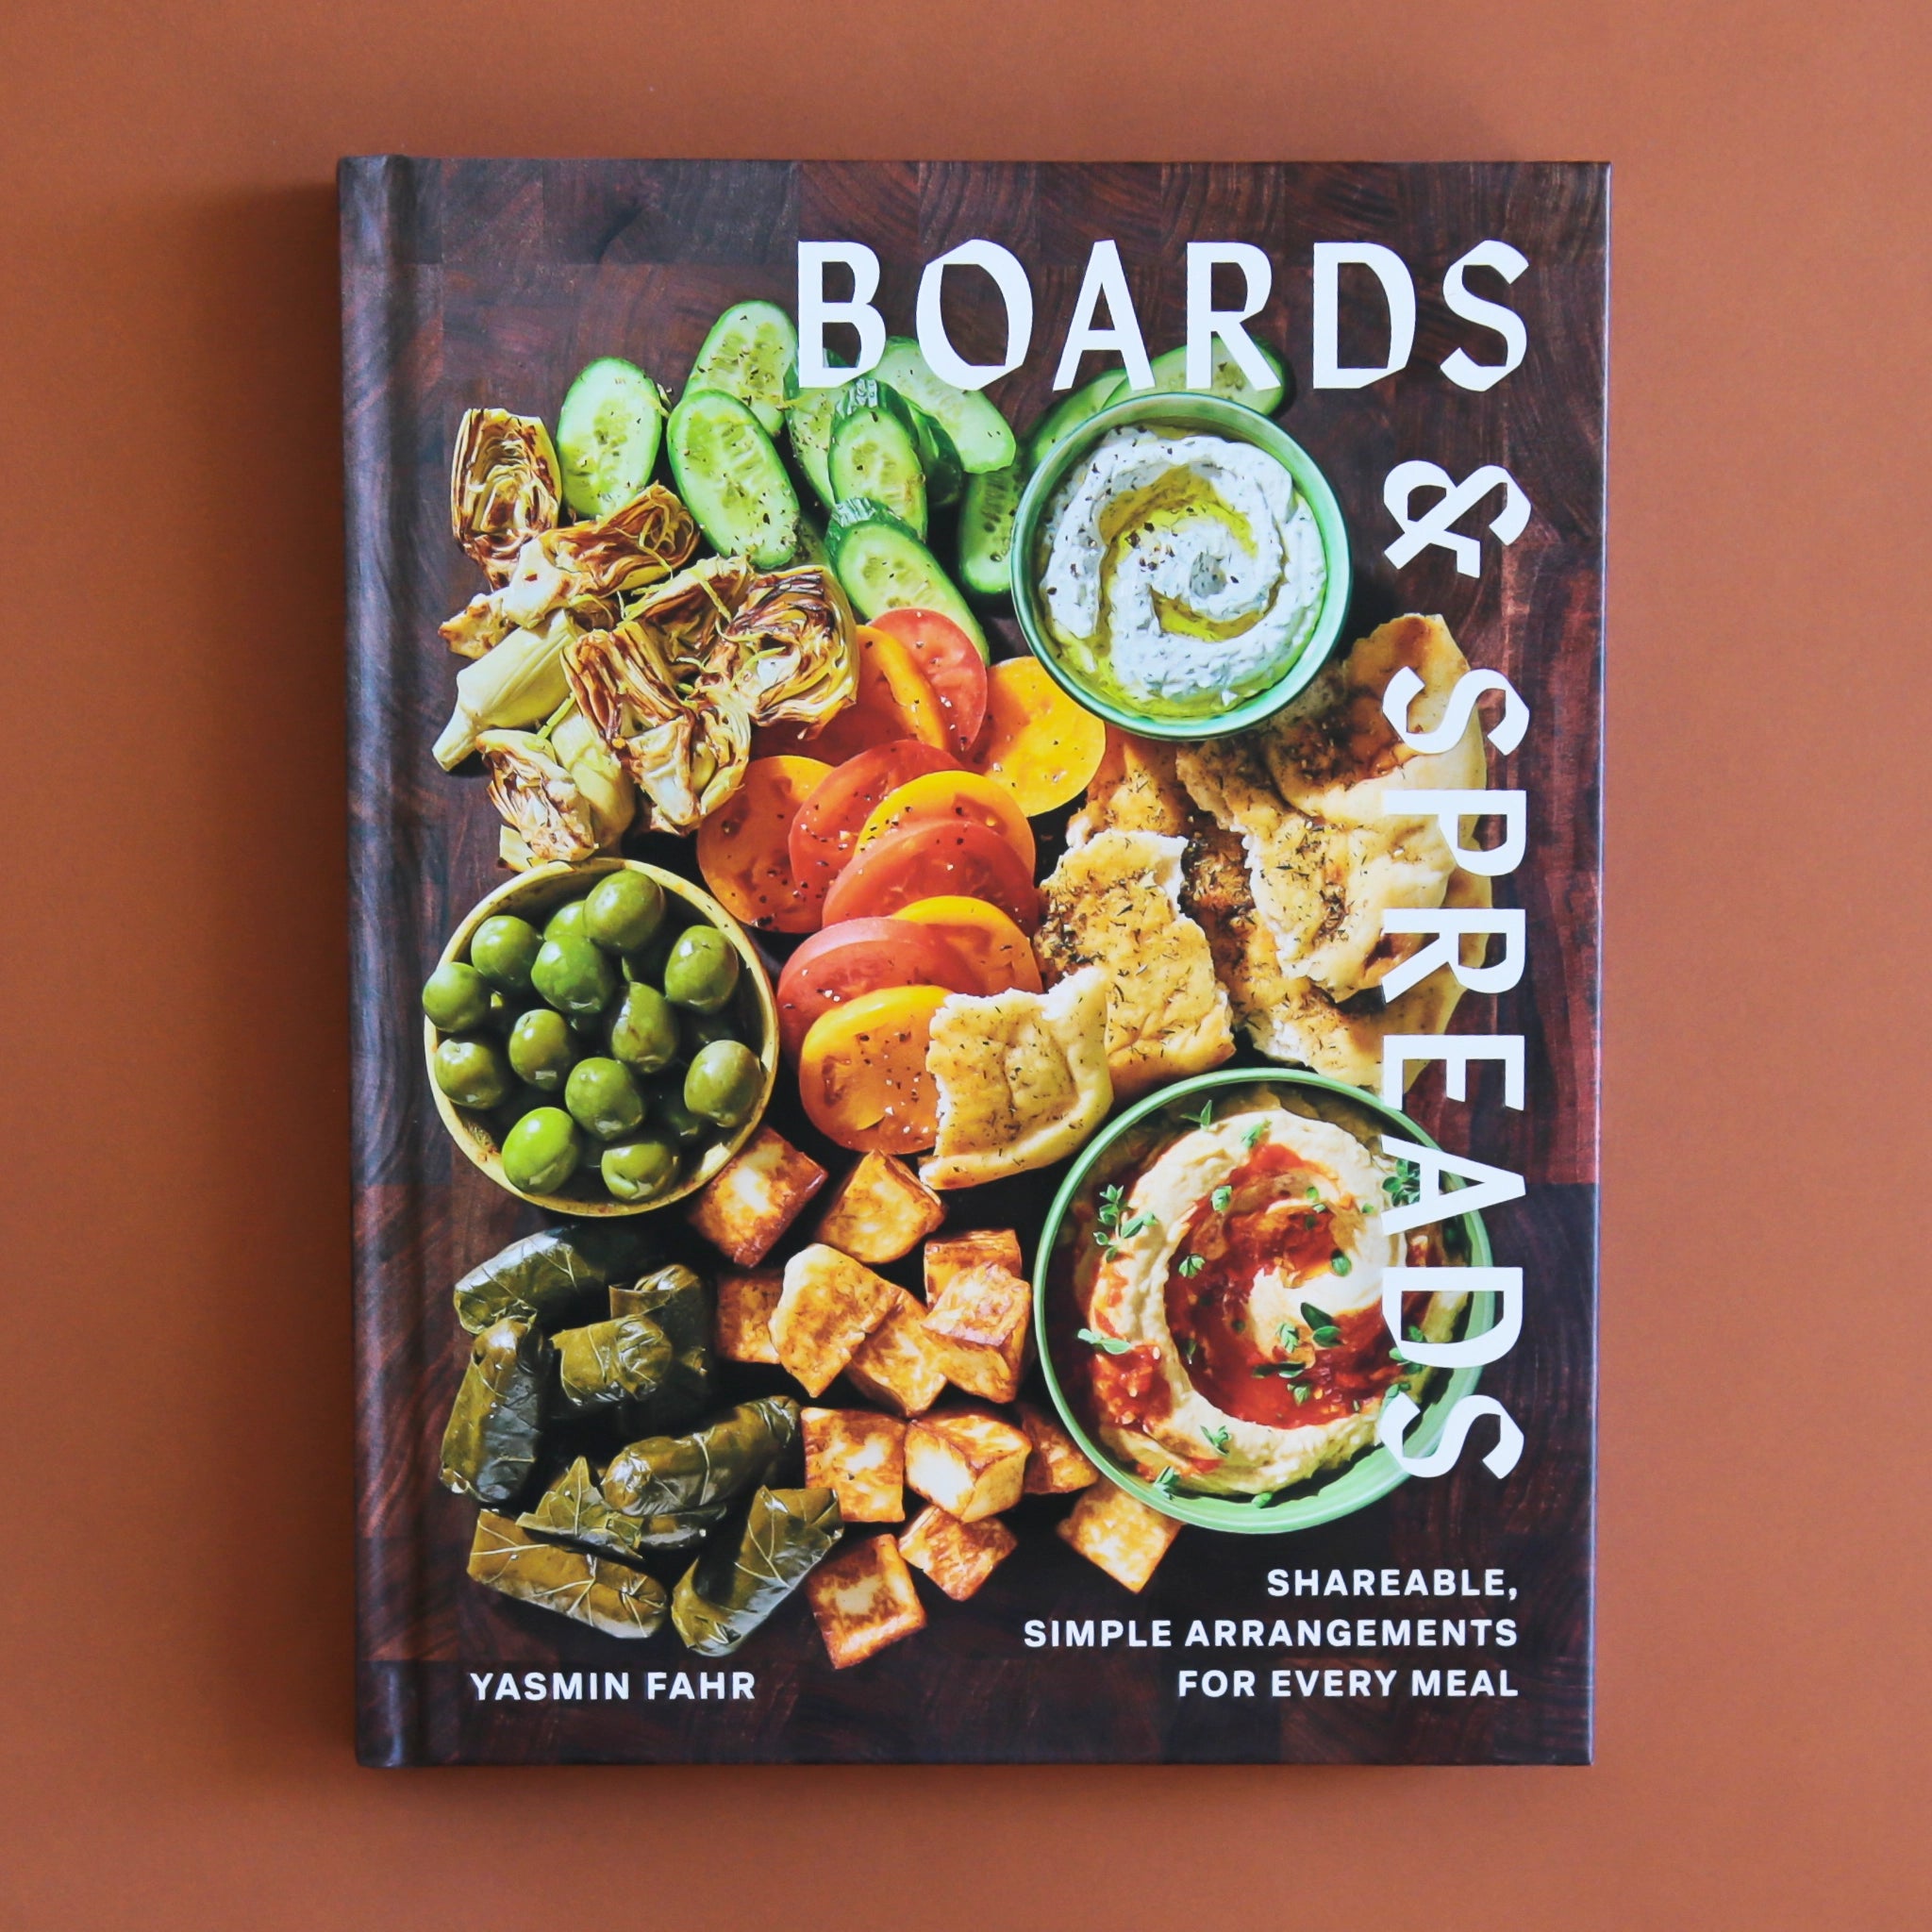 A book cover mimicking the look of a cutting board with a variety of charcuterie style foods, like olives, spreads, veggies and more.